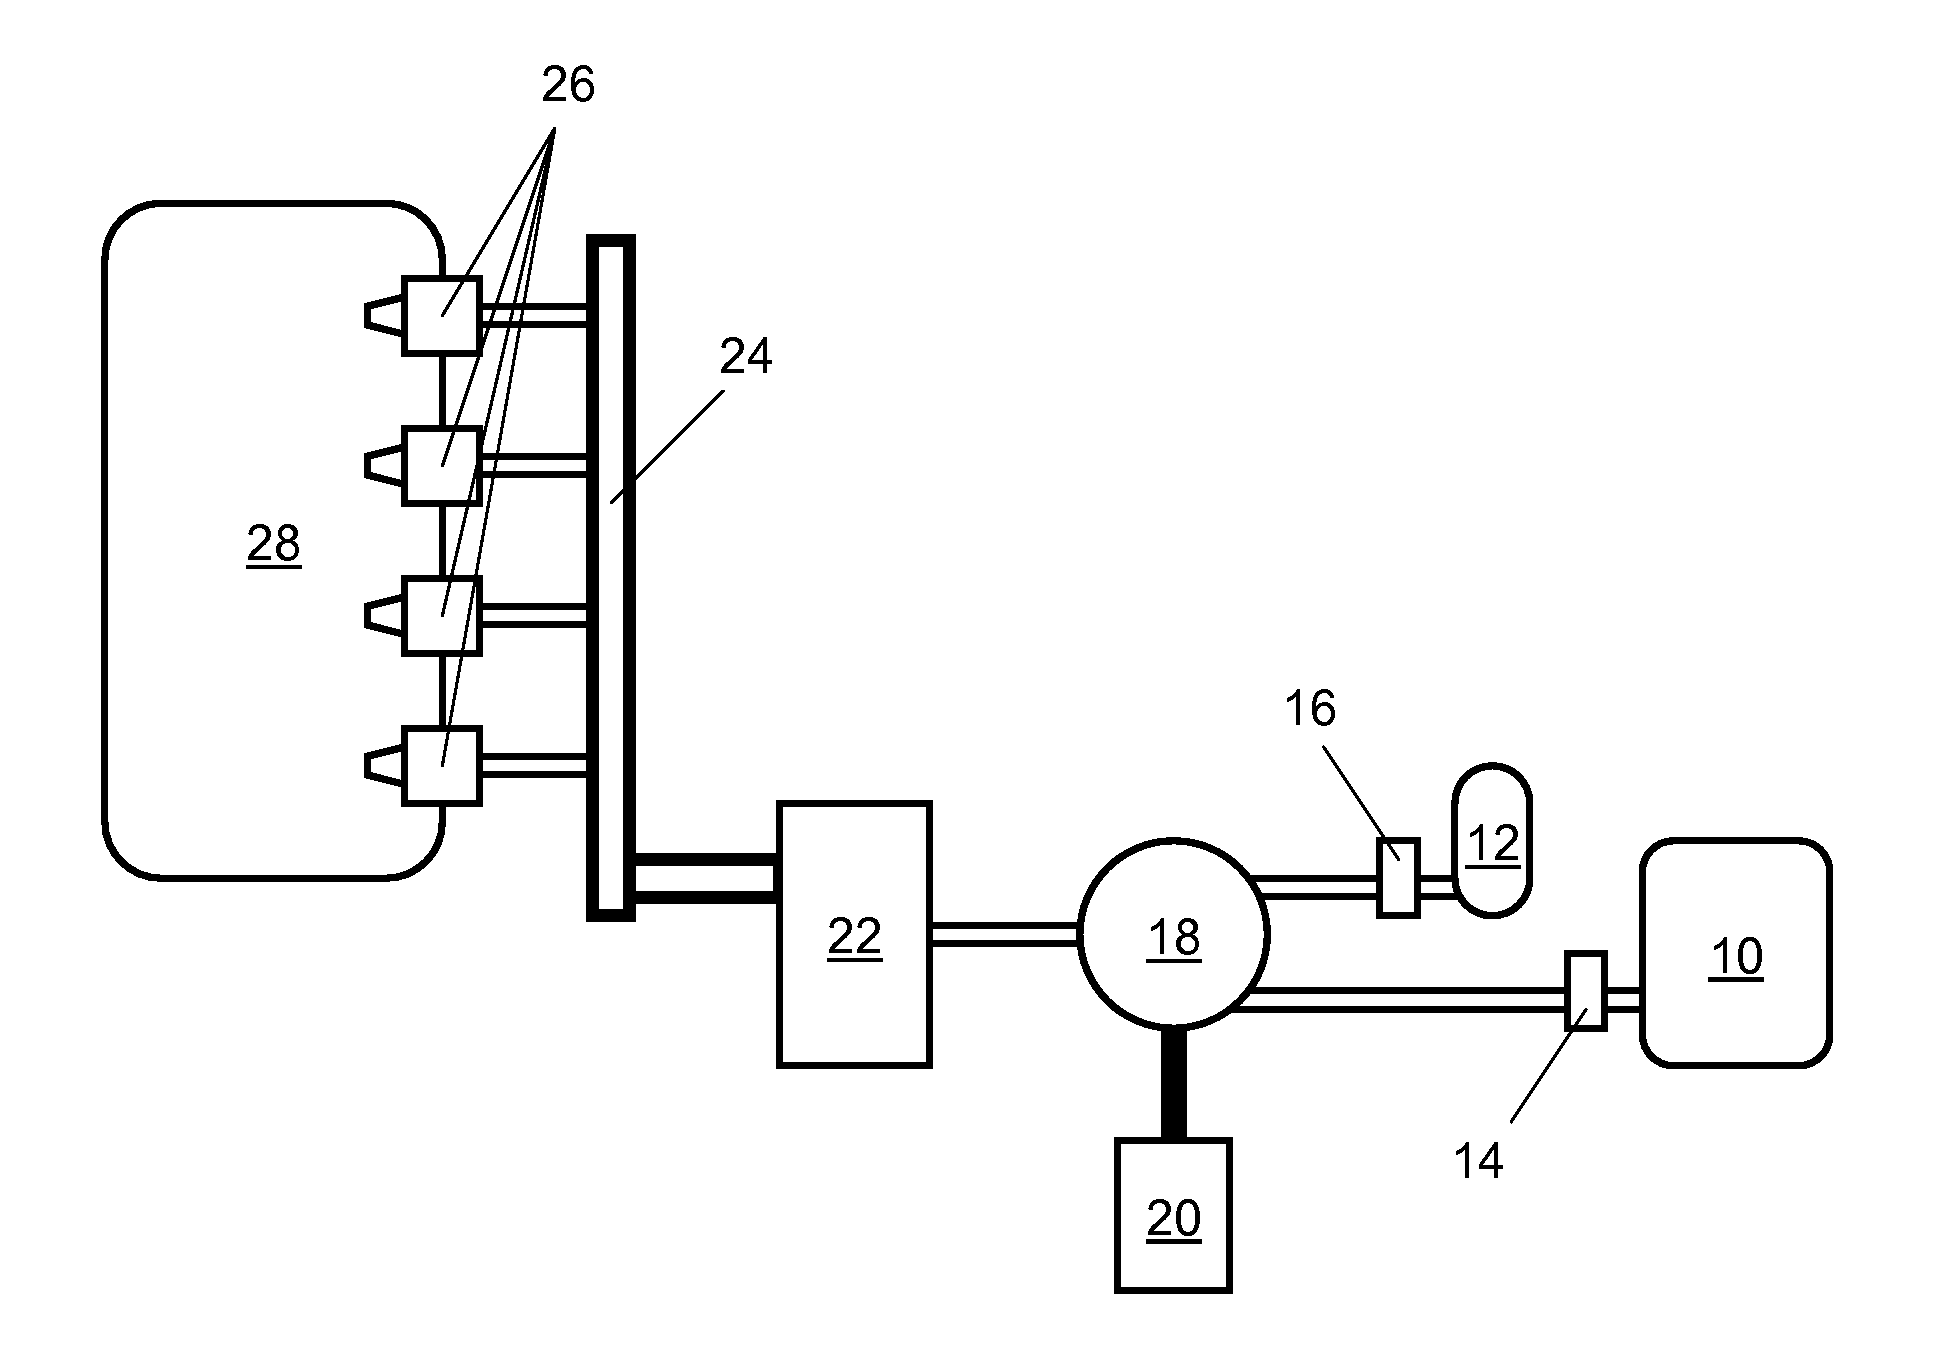 Single nozzle direct injection system for rapidly variable gasoline/Anti-knock agent mixtures